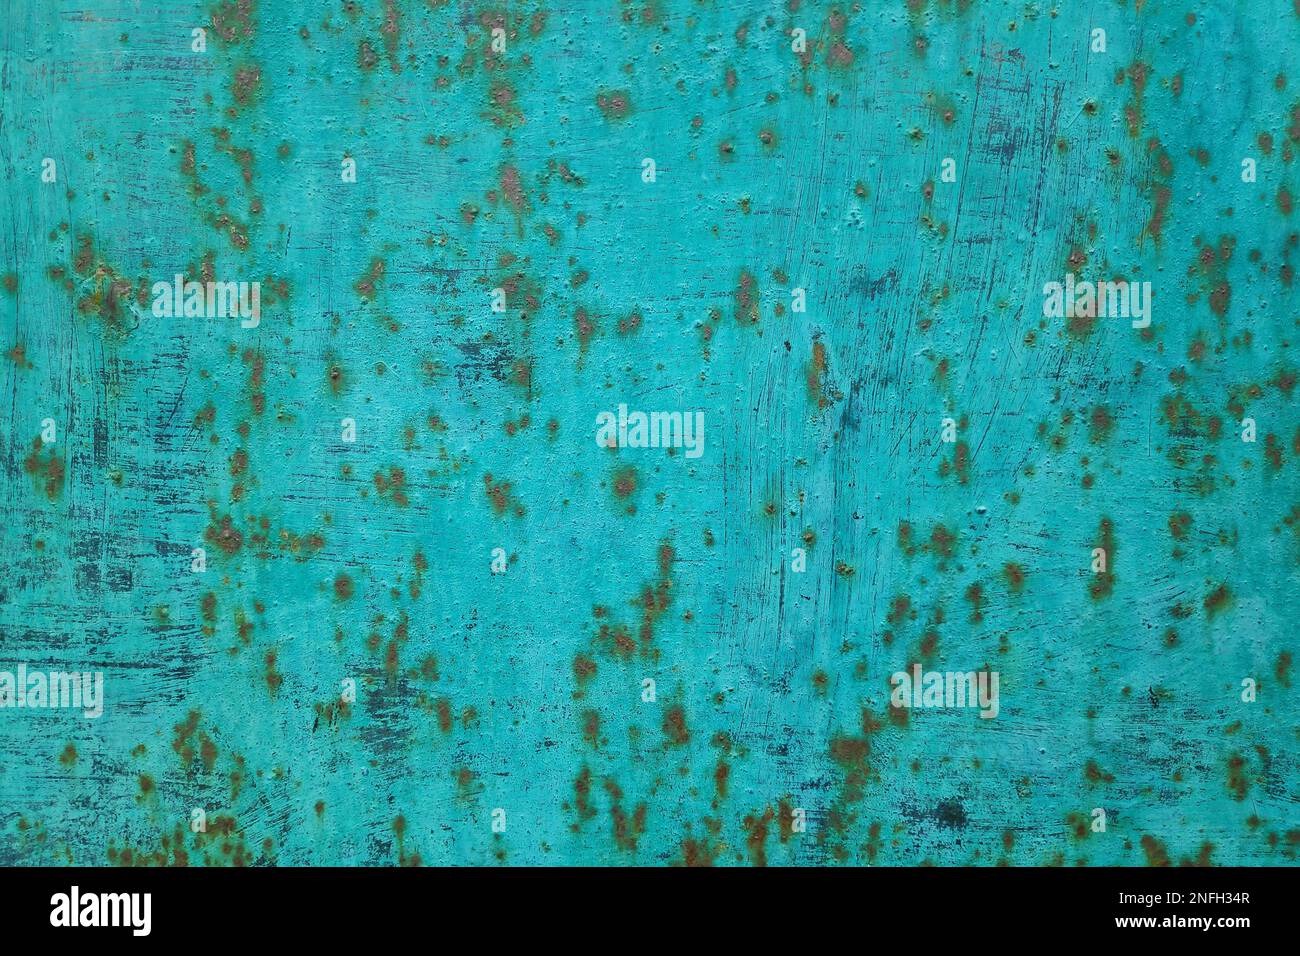 Full frame close-up on a rusty metal plate painted in turquoise. Stock Photo